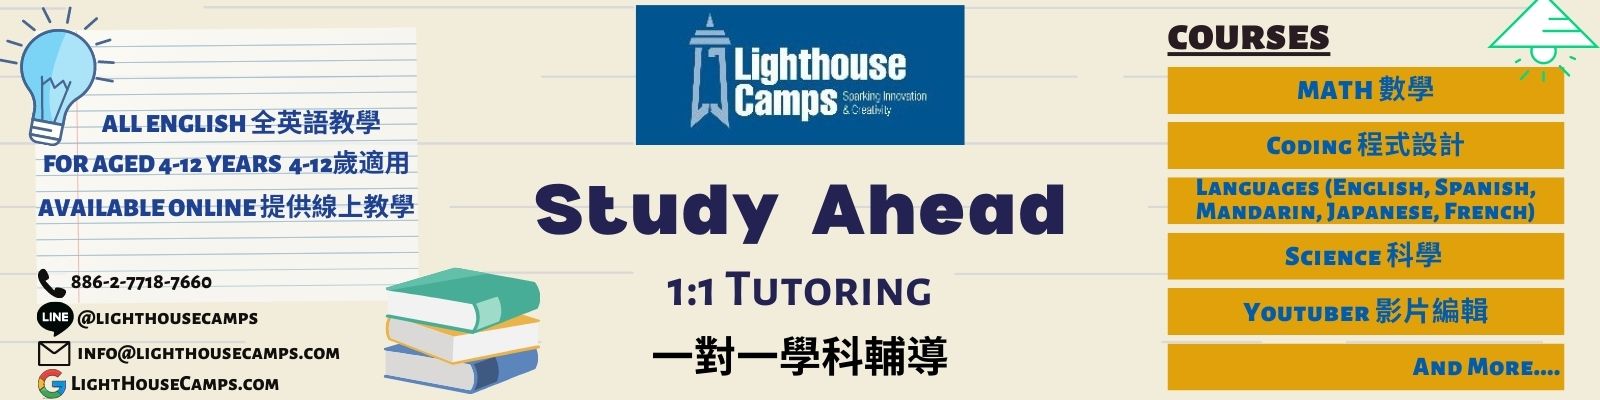 study ahead at Lighthouse camps 甚麼是Study Ahead 除了團班課程之外，Lighthouse Camps也有提供Study Ahead--即一對一、一對二的家教課程，針對學校課業的加強或先修，或是像西班牙文或是英文的閱讀、phonics等等，皆有提供。   Study Ahead 如何進行 針對家教科目先進行簡單的評量，了解學生的擅長之處與可加強的部分 根據評量結果，安排專屬的教學計畫 每個孩子都有自己的學習計劃以及預計成果，並且在授課過程中定期持續與家長跟老師們連絡孩子的學習狀況 What is Study Ahead? Study Ahead is a period set aside for students to work in the areas of English, Math, Spanish, and any other fields, with guidance from a teacher. The goal is to advance 1 to 2 grade levels in which the student is currently at. How does Study Ahead work? Student will do a simple assessment, which will determine the student's strengths, and weaknesses. Based on the results, he/she will be provided with a specific course plan. Each student will have a personalized academic goal to achieve. 